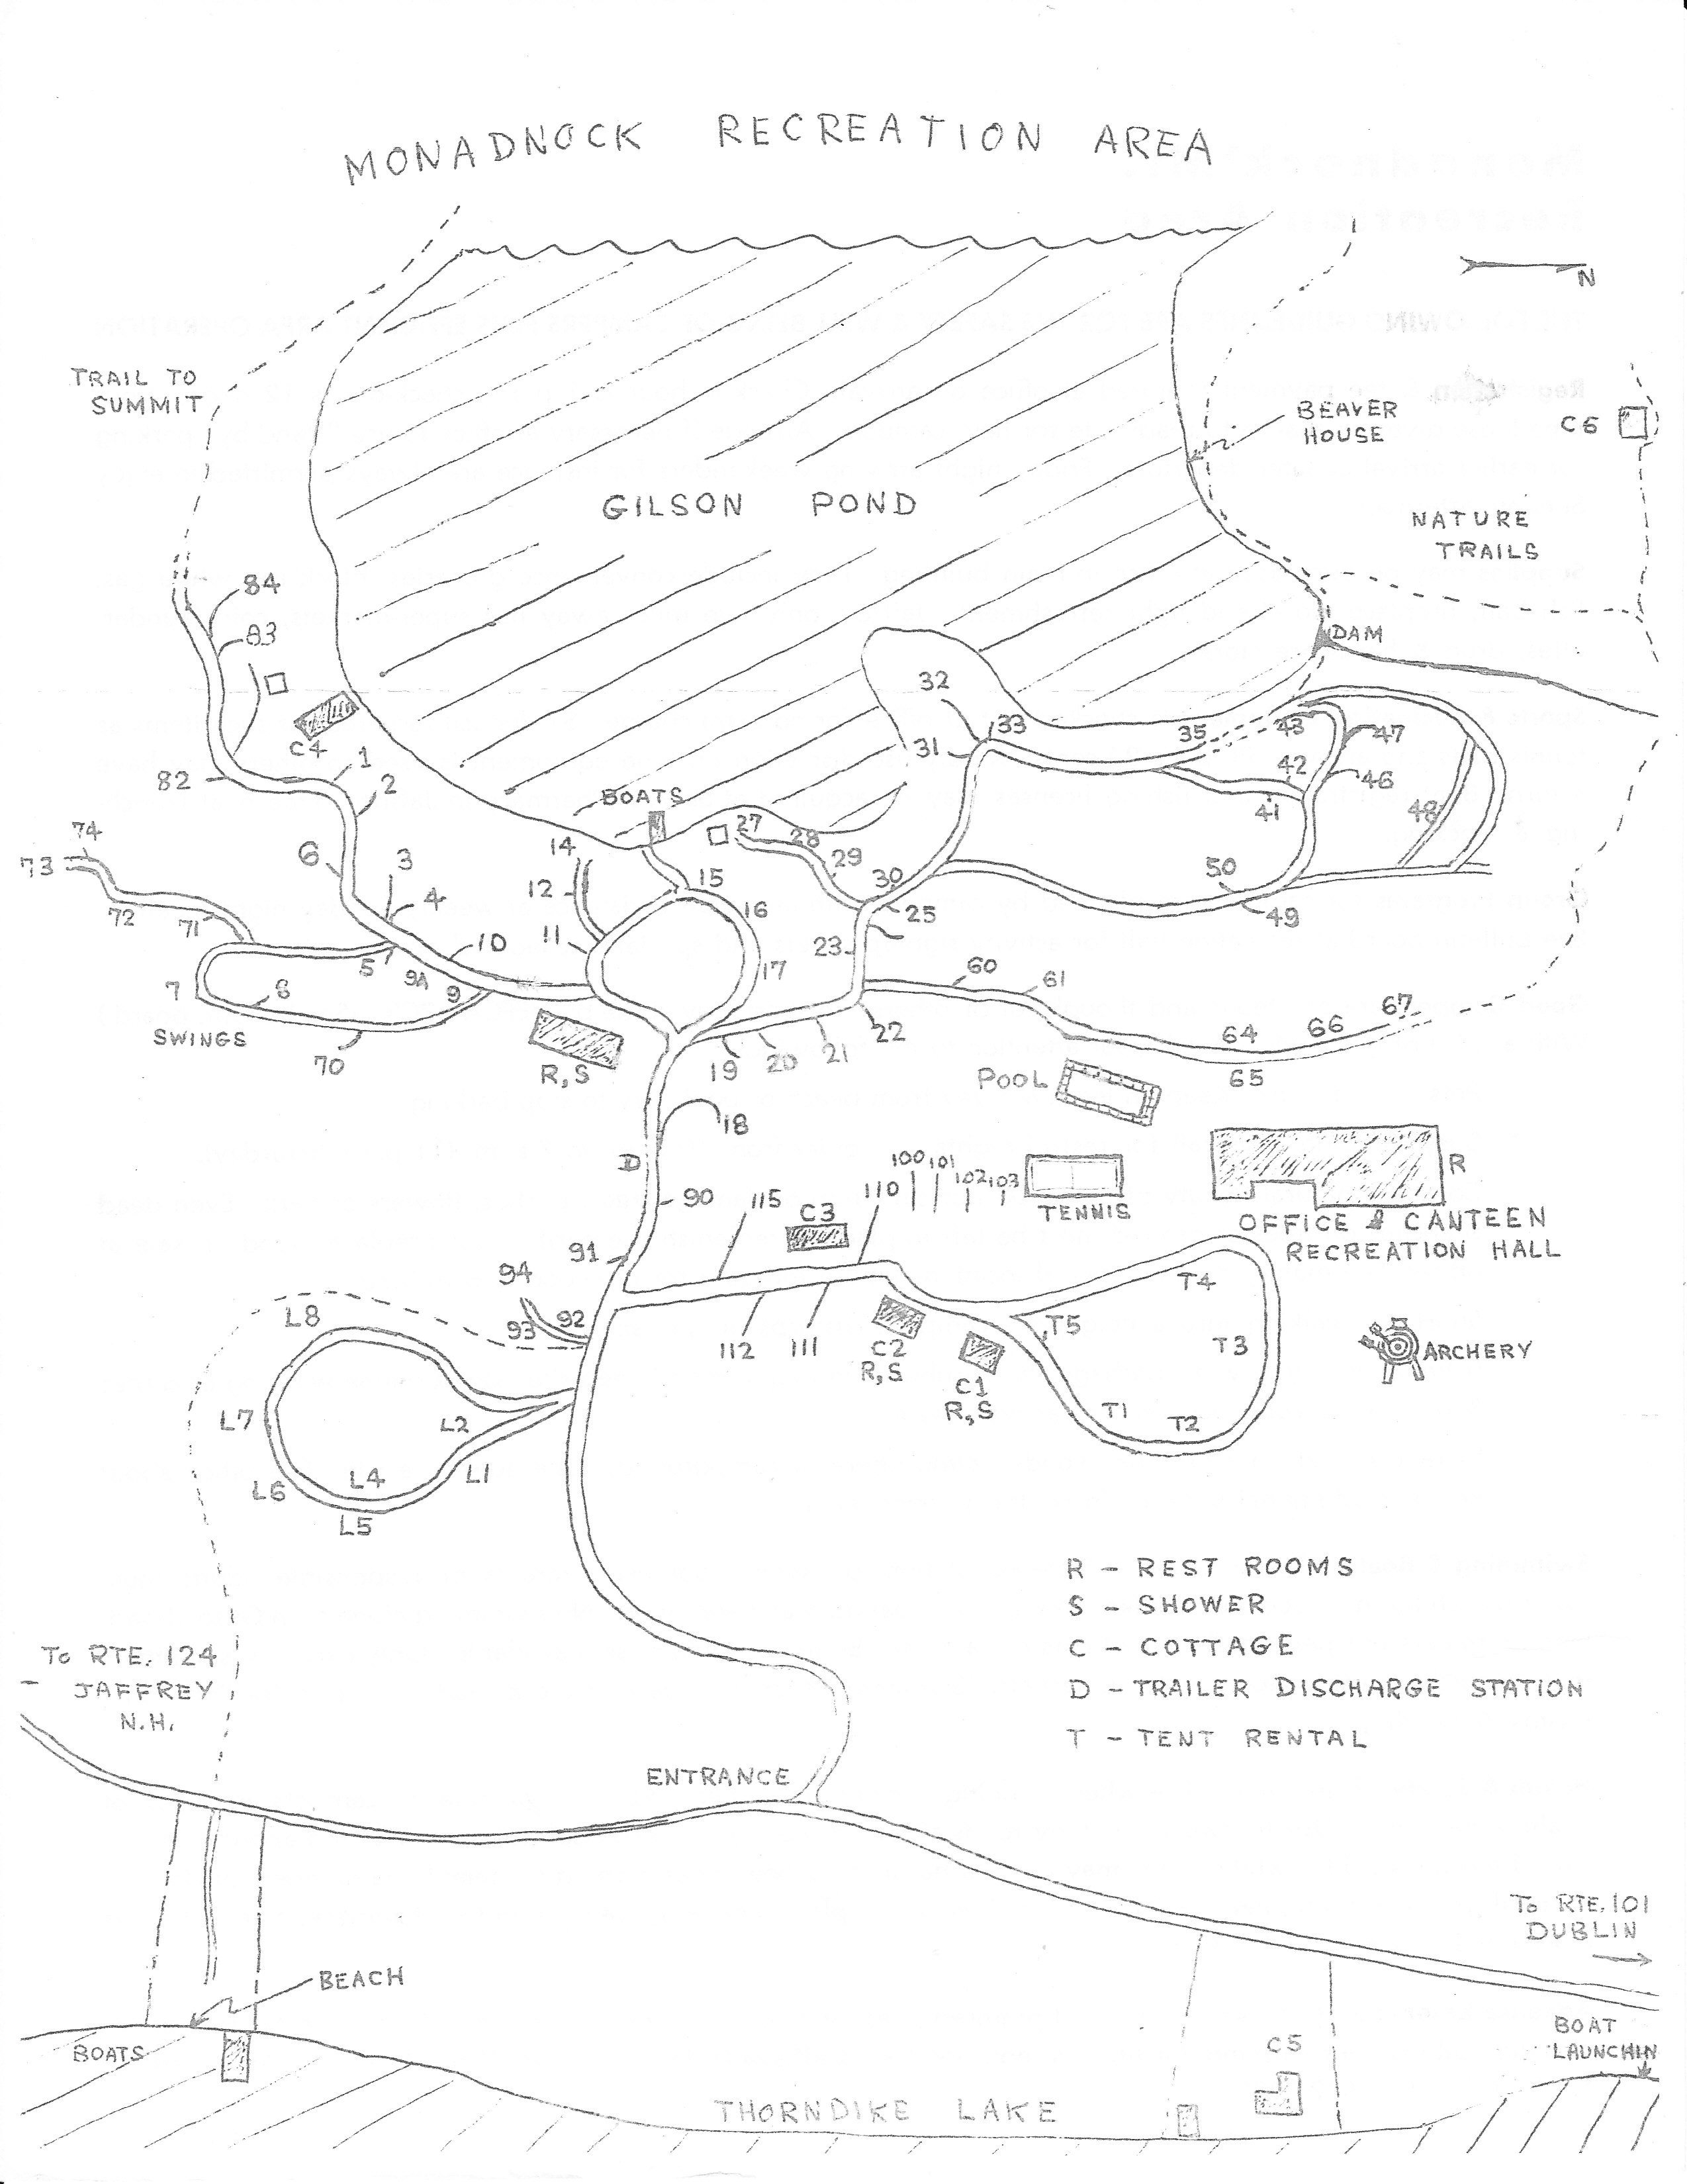 Here is an old map of the grounds of the "Monadnock Recreation Area" from the Monadnock State Park archives.